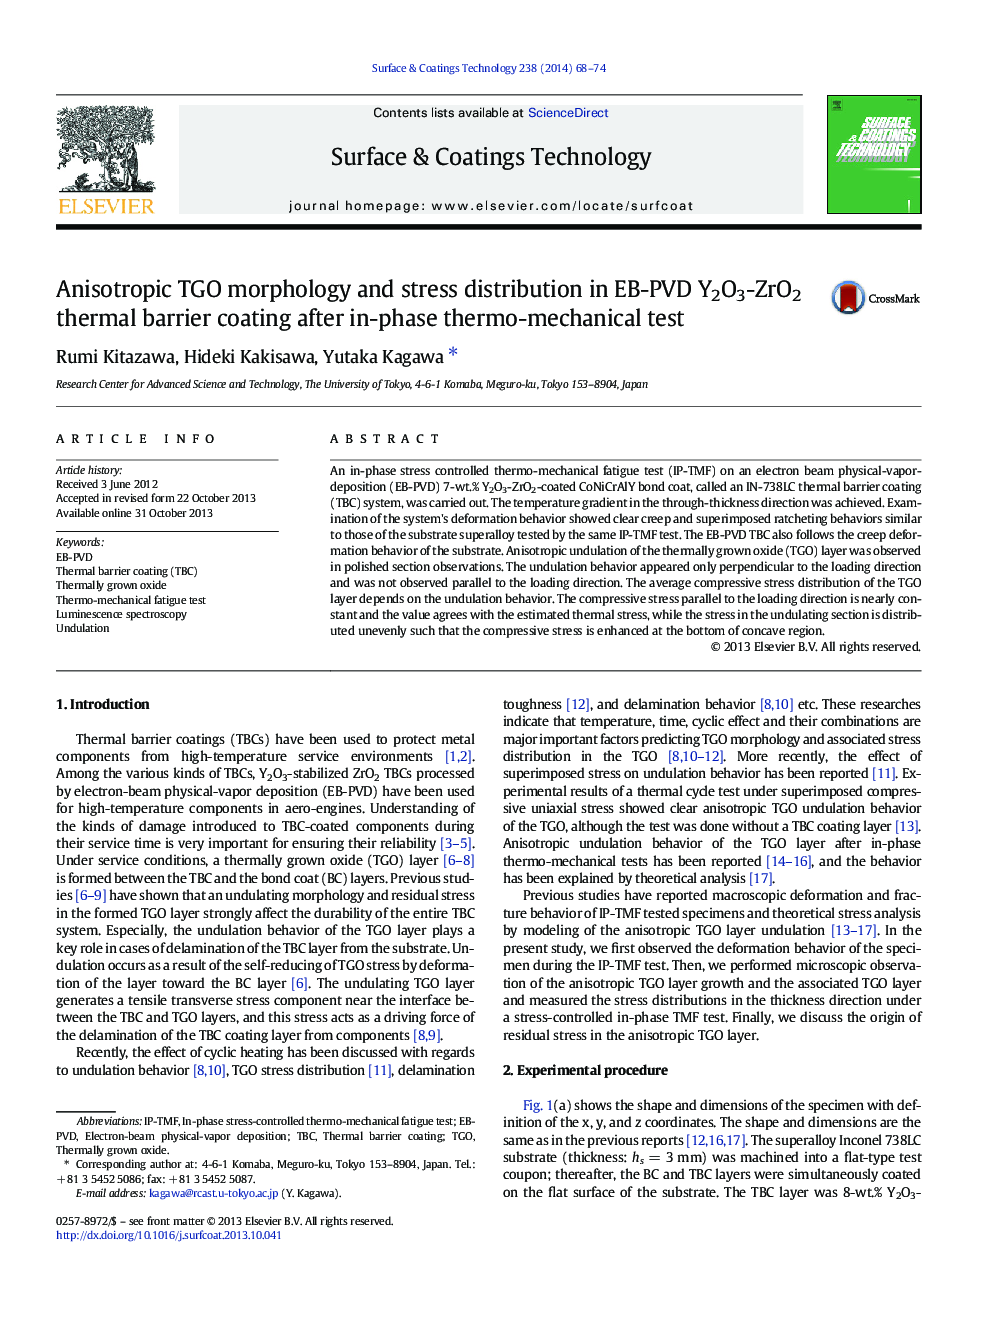 Anisotropic TGO morphology and stress distribution in EB-PVD Y2O3-ZrO2 thermal barrier coating after in-phase thermo-mechanical test